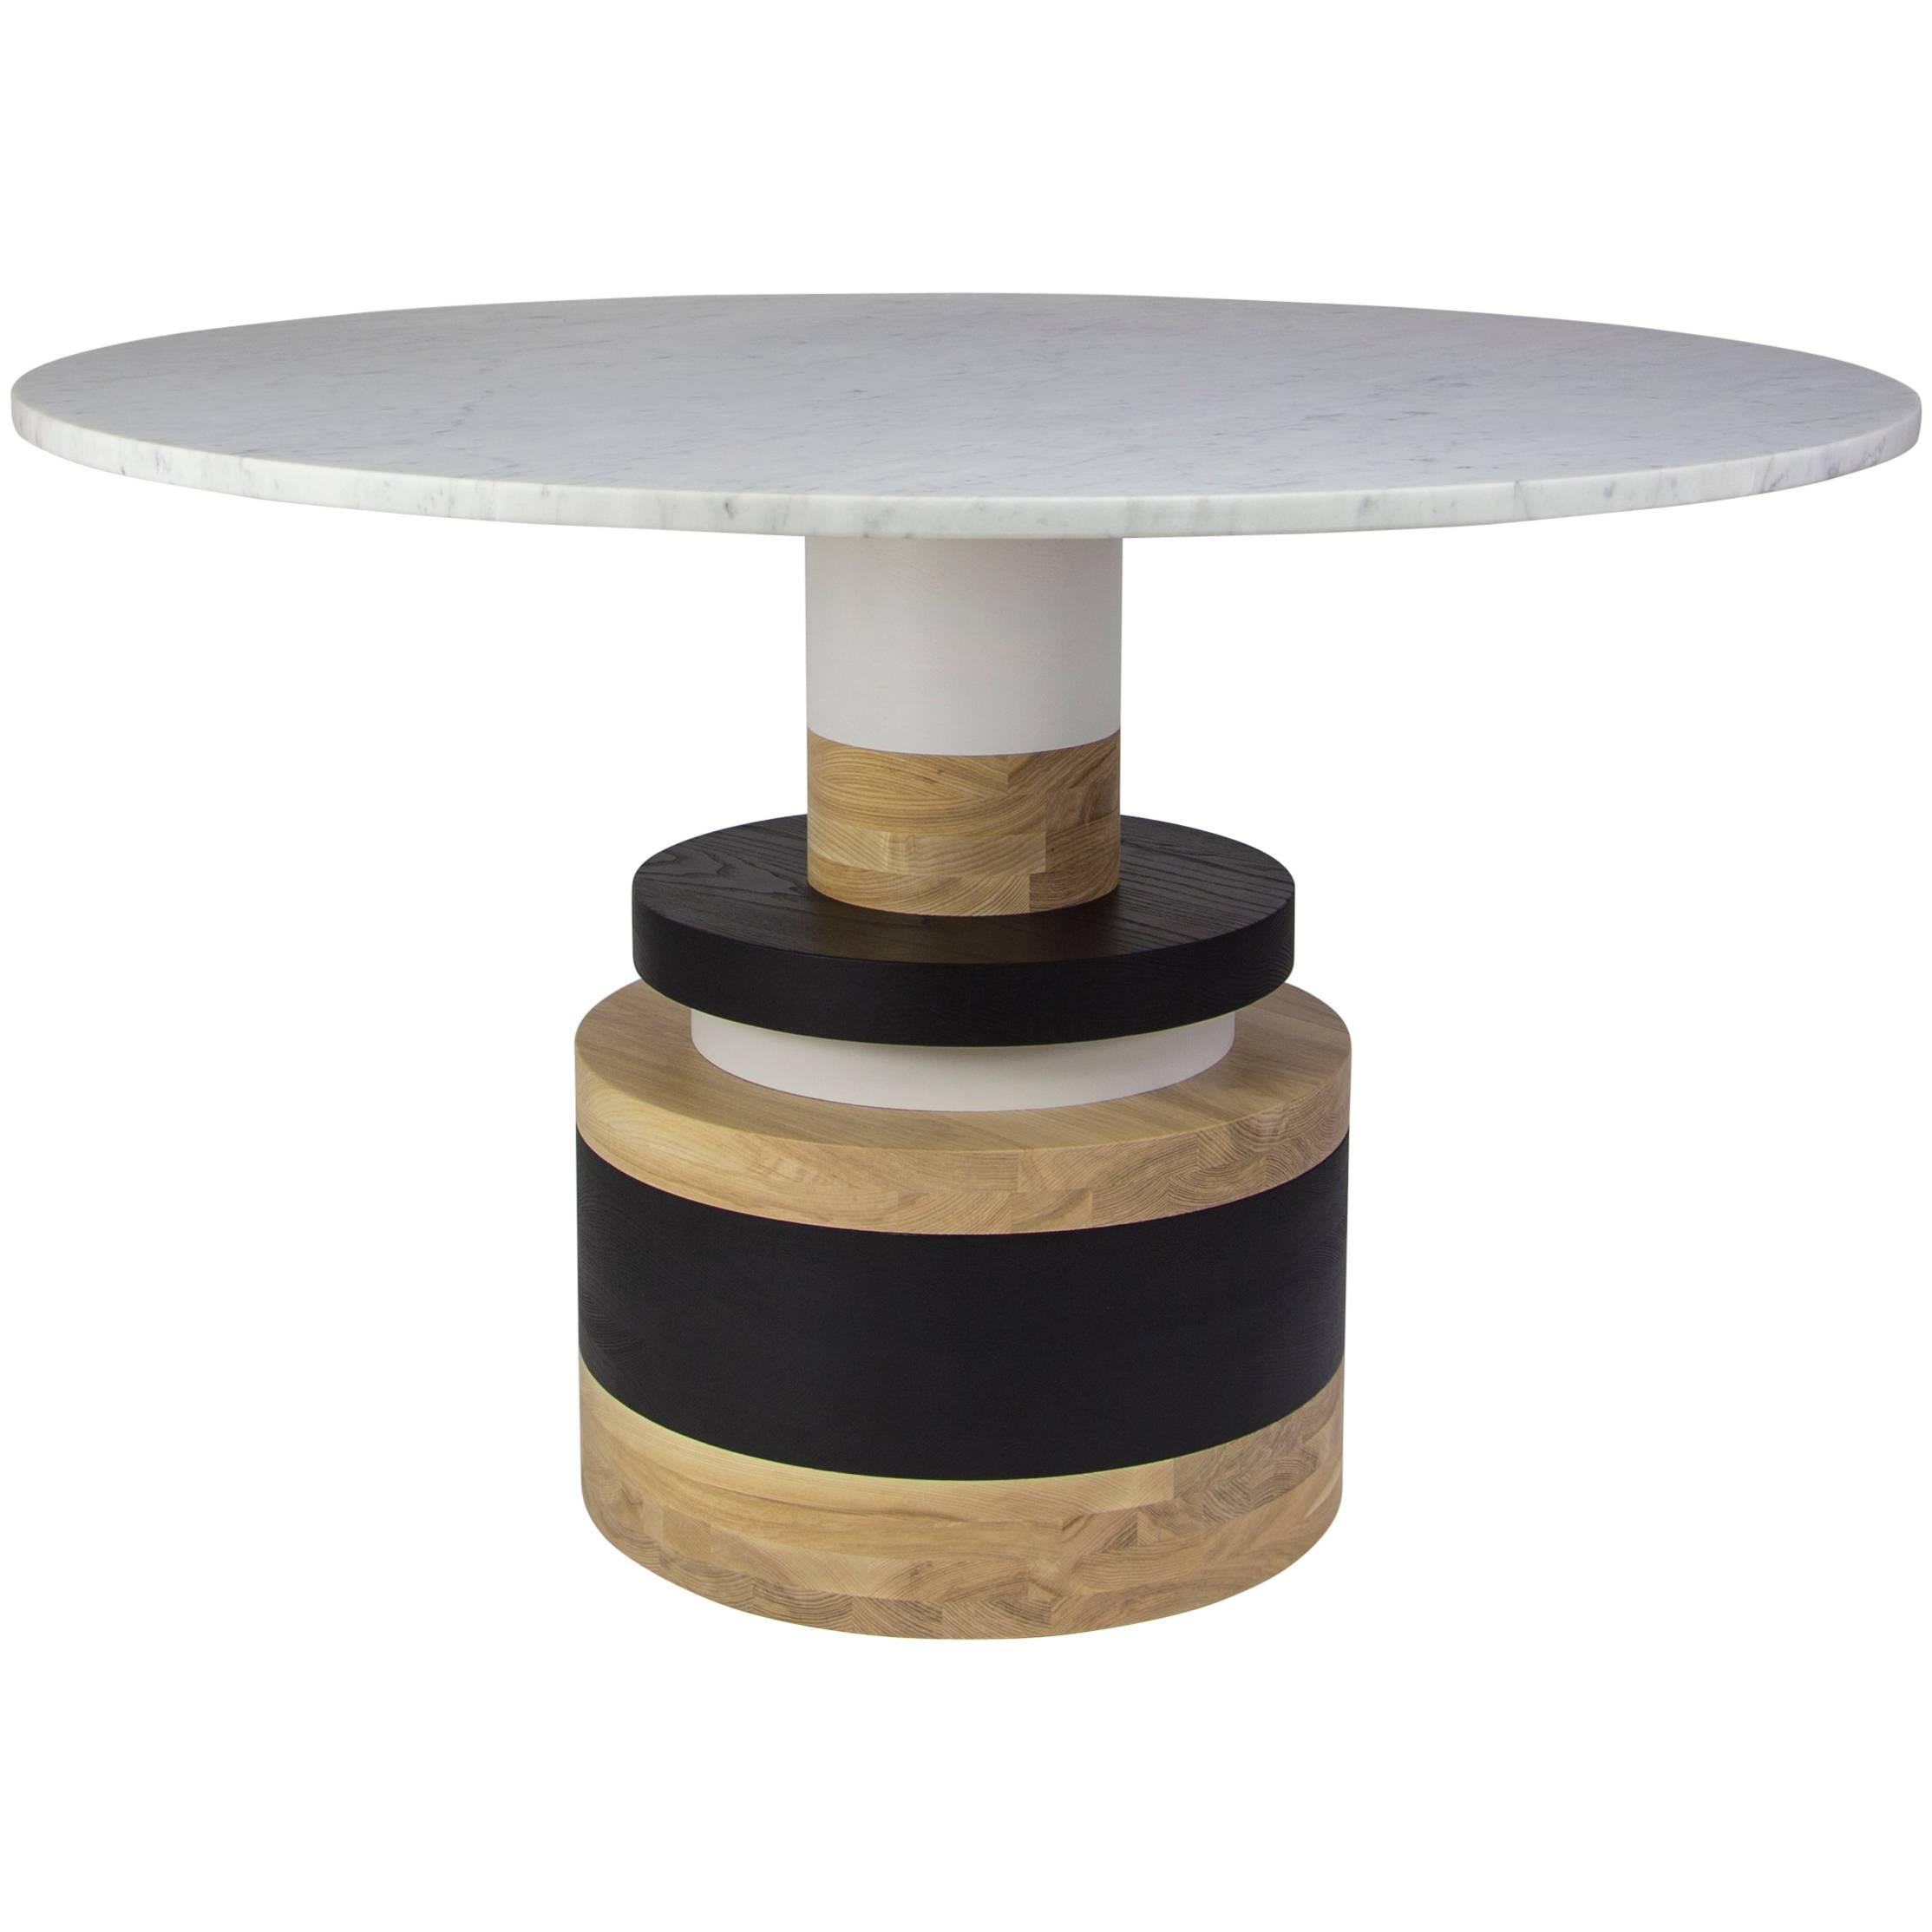 The Sottsass-inspired “Sass Dining Table” is a bold, graphic statement piece. A polished Nero Marquina marble top sits on an Amish-made base composed of painted and stacked wood circles. 

The version as shown is 47